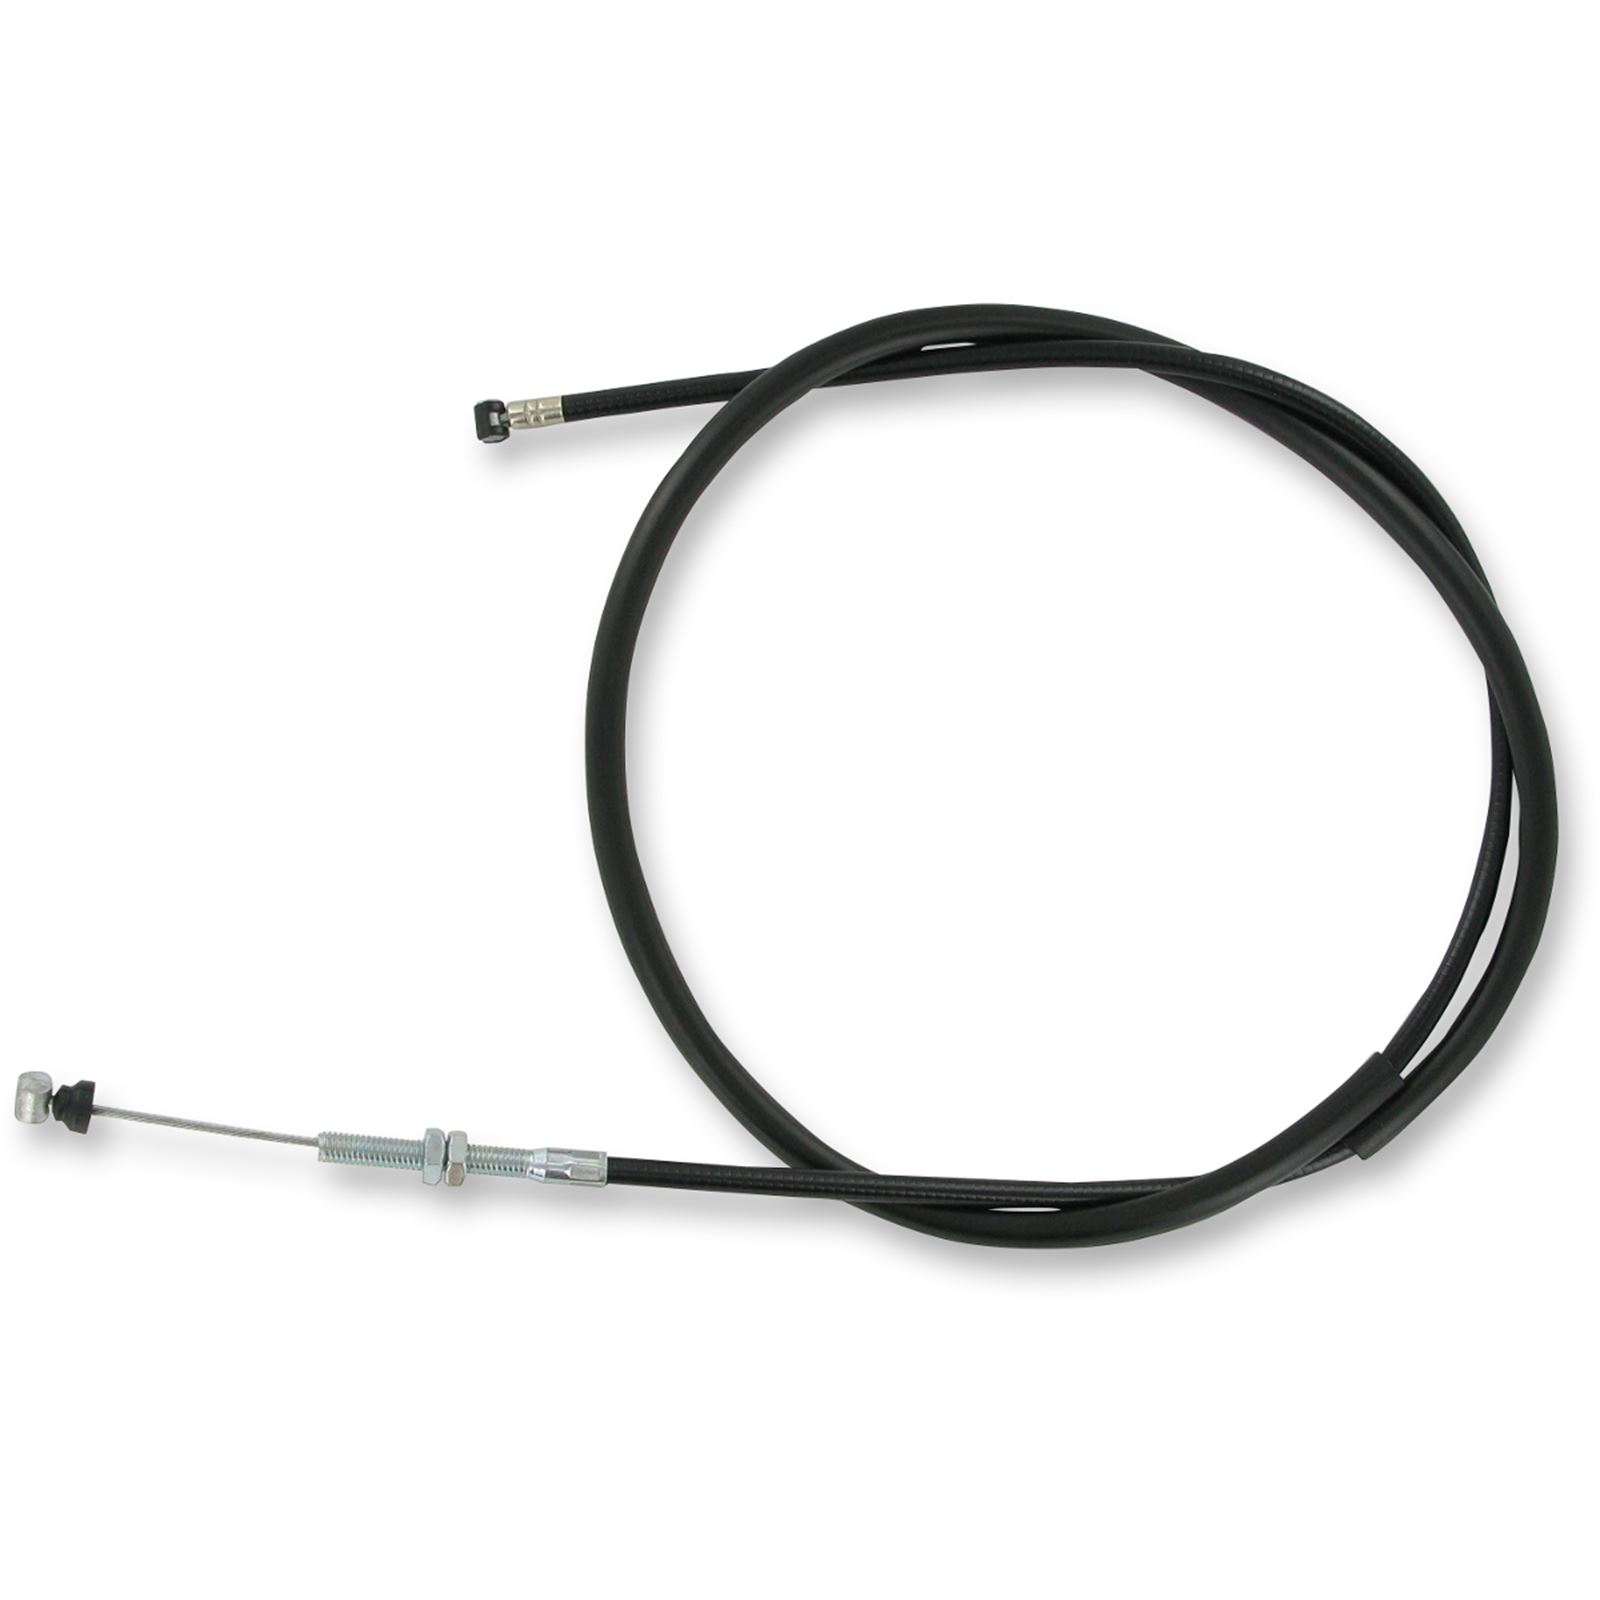 Parts Unlimited Brake Cable for Honda